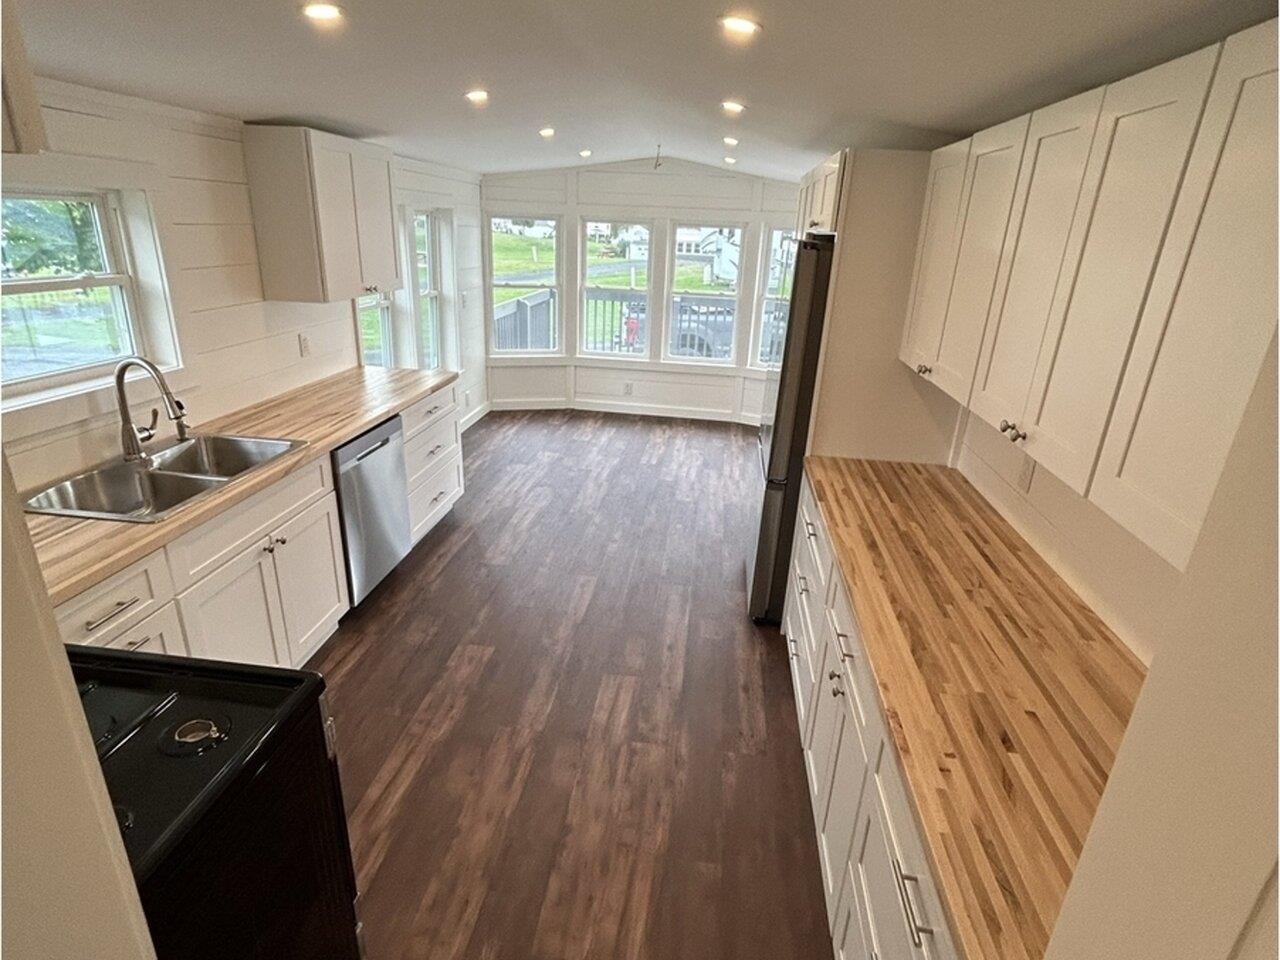 Kitchen looking to dining area